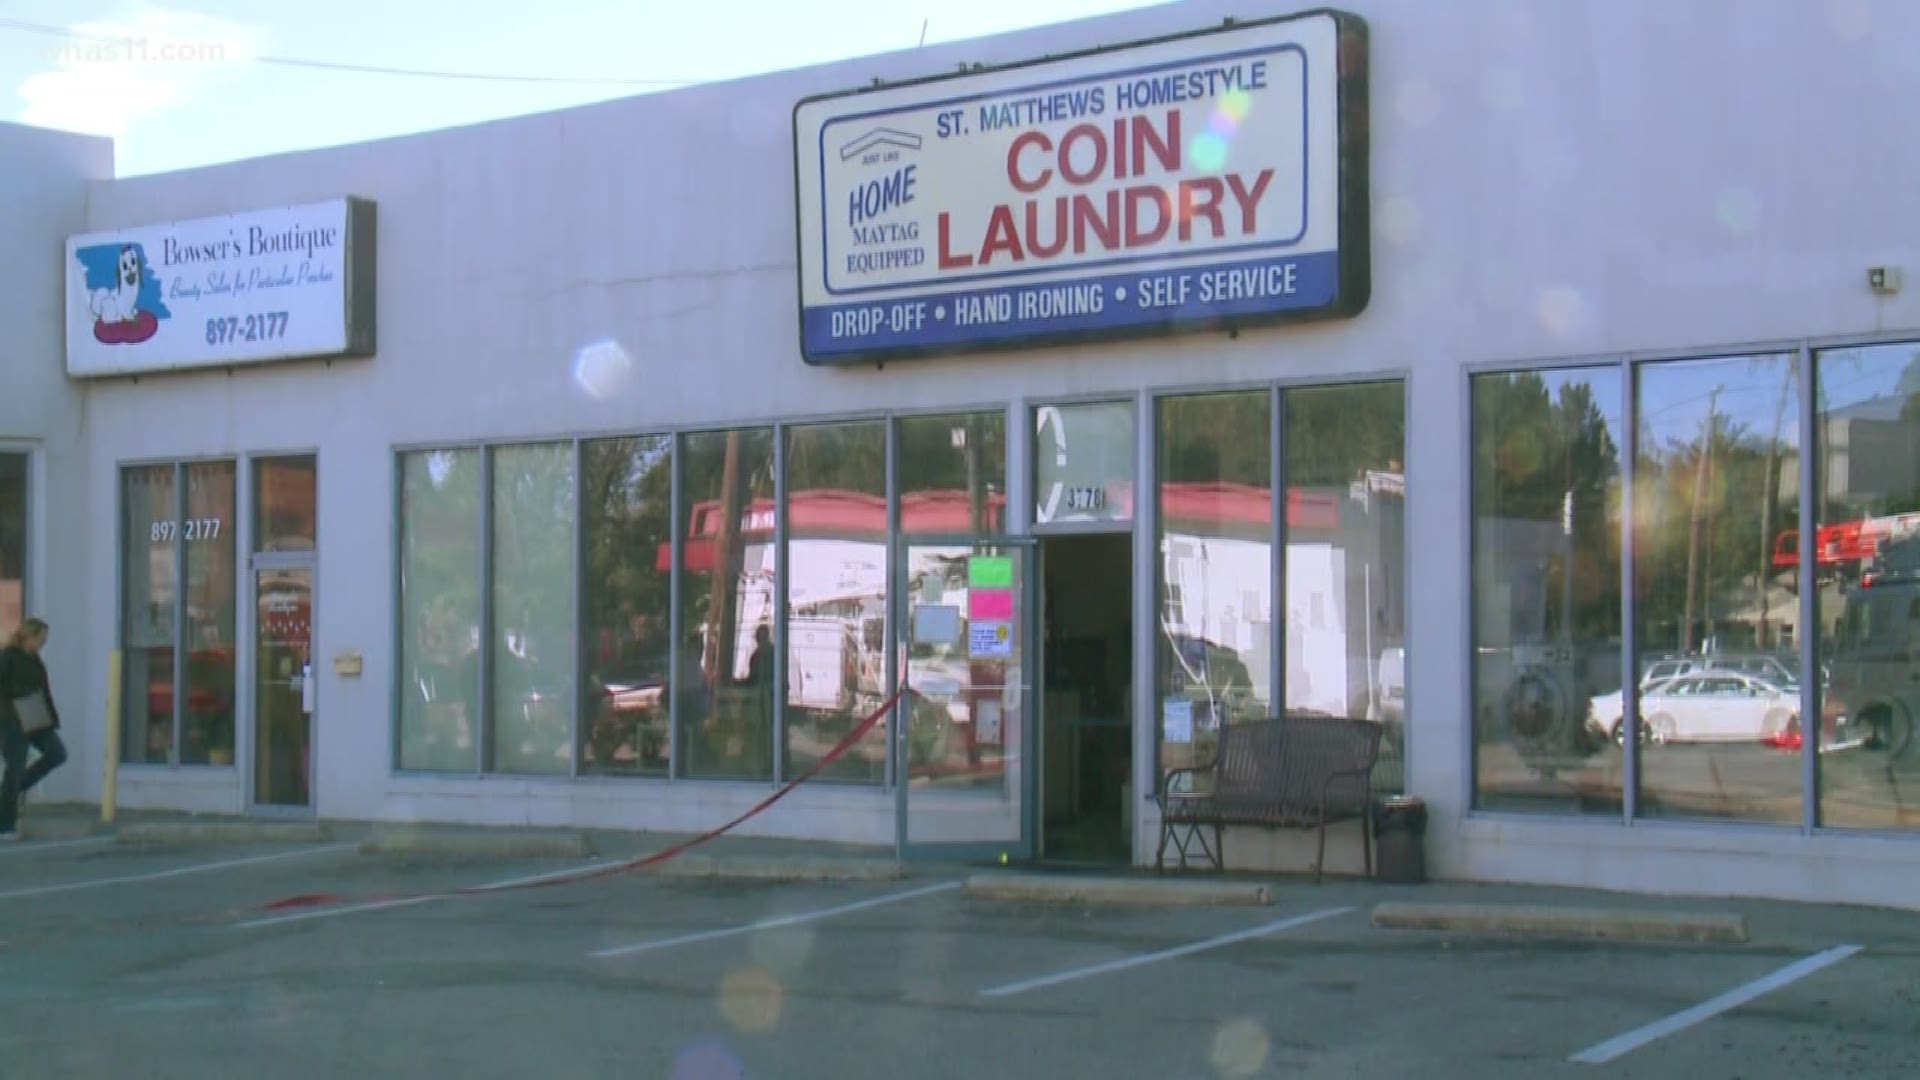 Several calls reported smoke at the St. Matthews Homestyle Coin Laundry just before 9 a.m. Oct. 19.